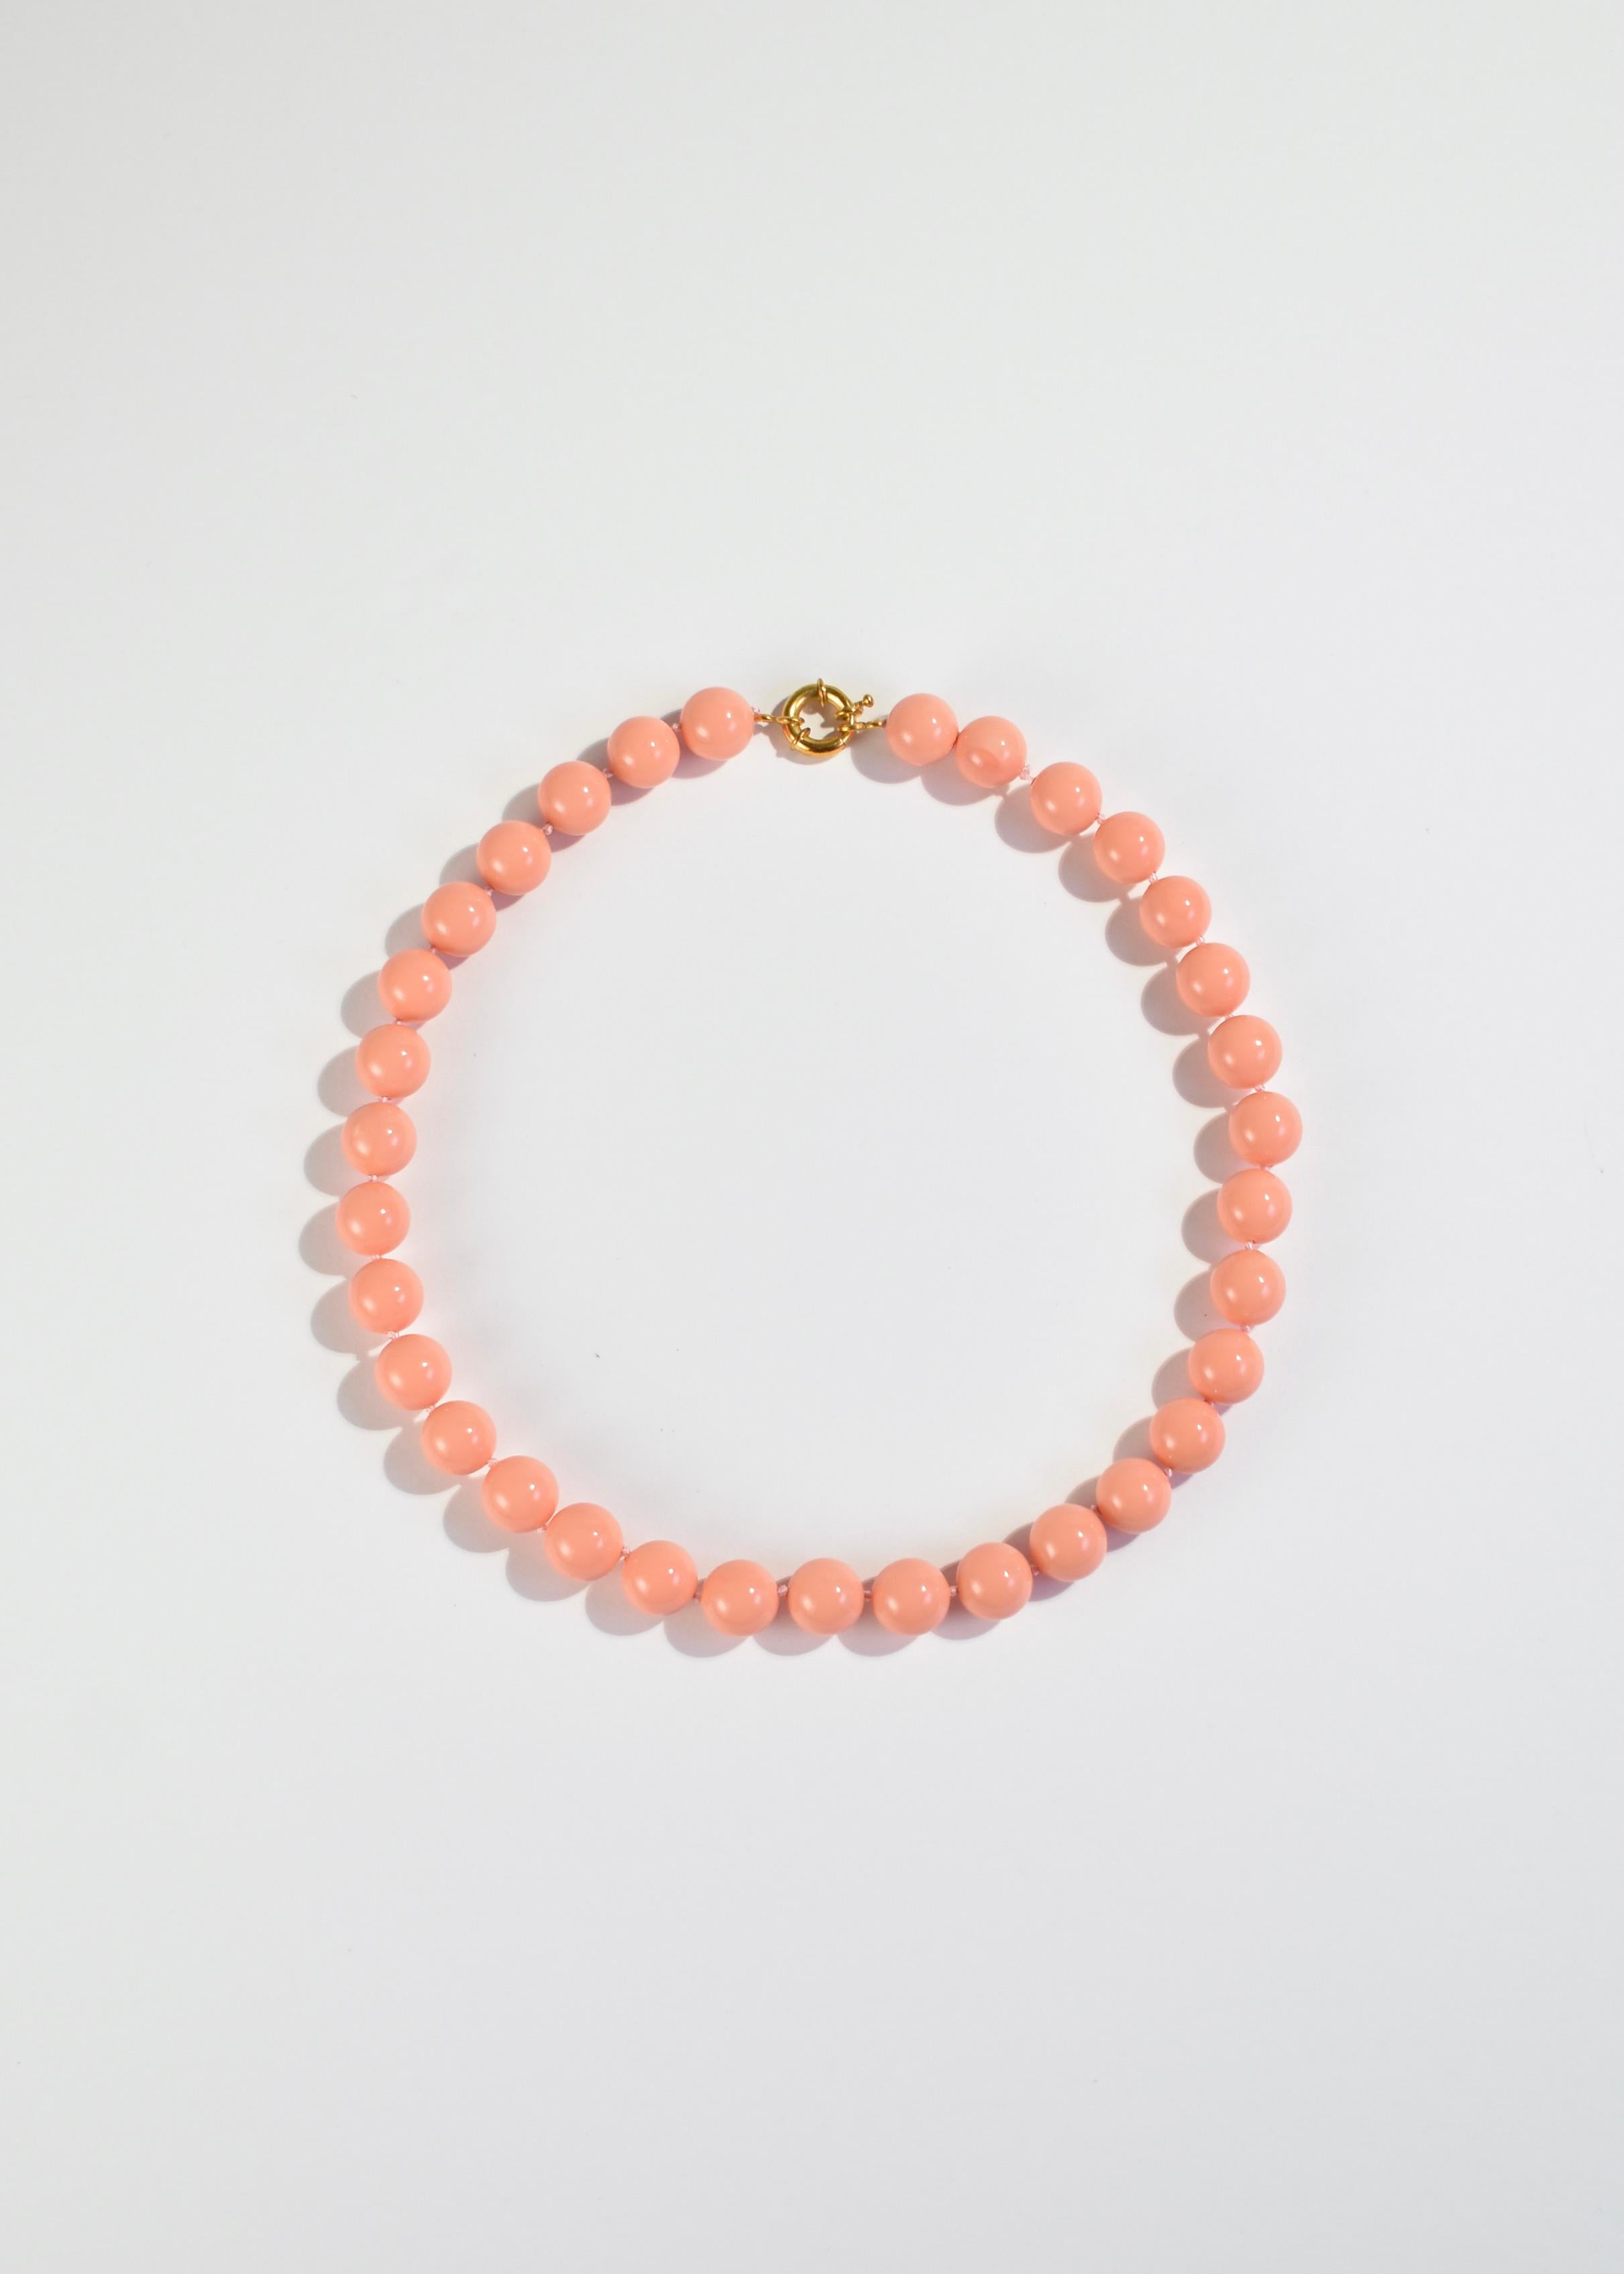 Stunning vintage necklace with round coral glass beads and an oversized clasp closure.

Material: Gold vermeil, glass. 